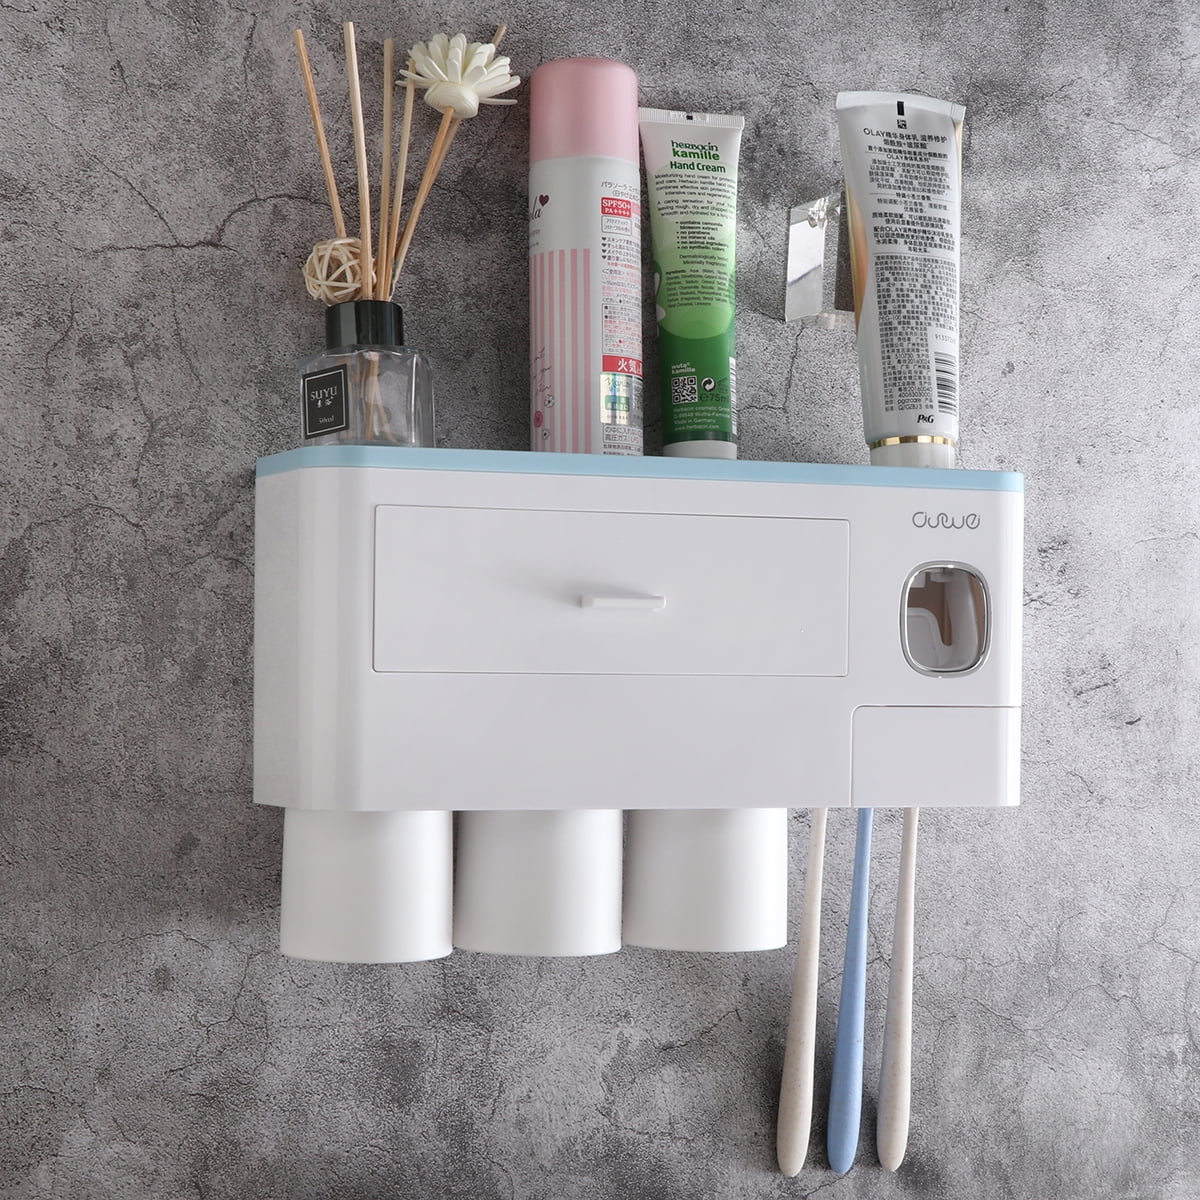 Details about   Automatic Toothpaste Dispenser Toothbrush Holder Wall Mount Storage Rack *2 CUPS 